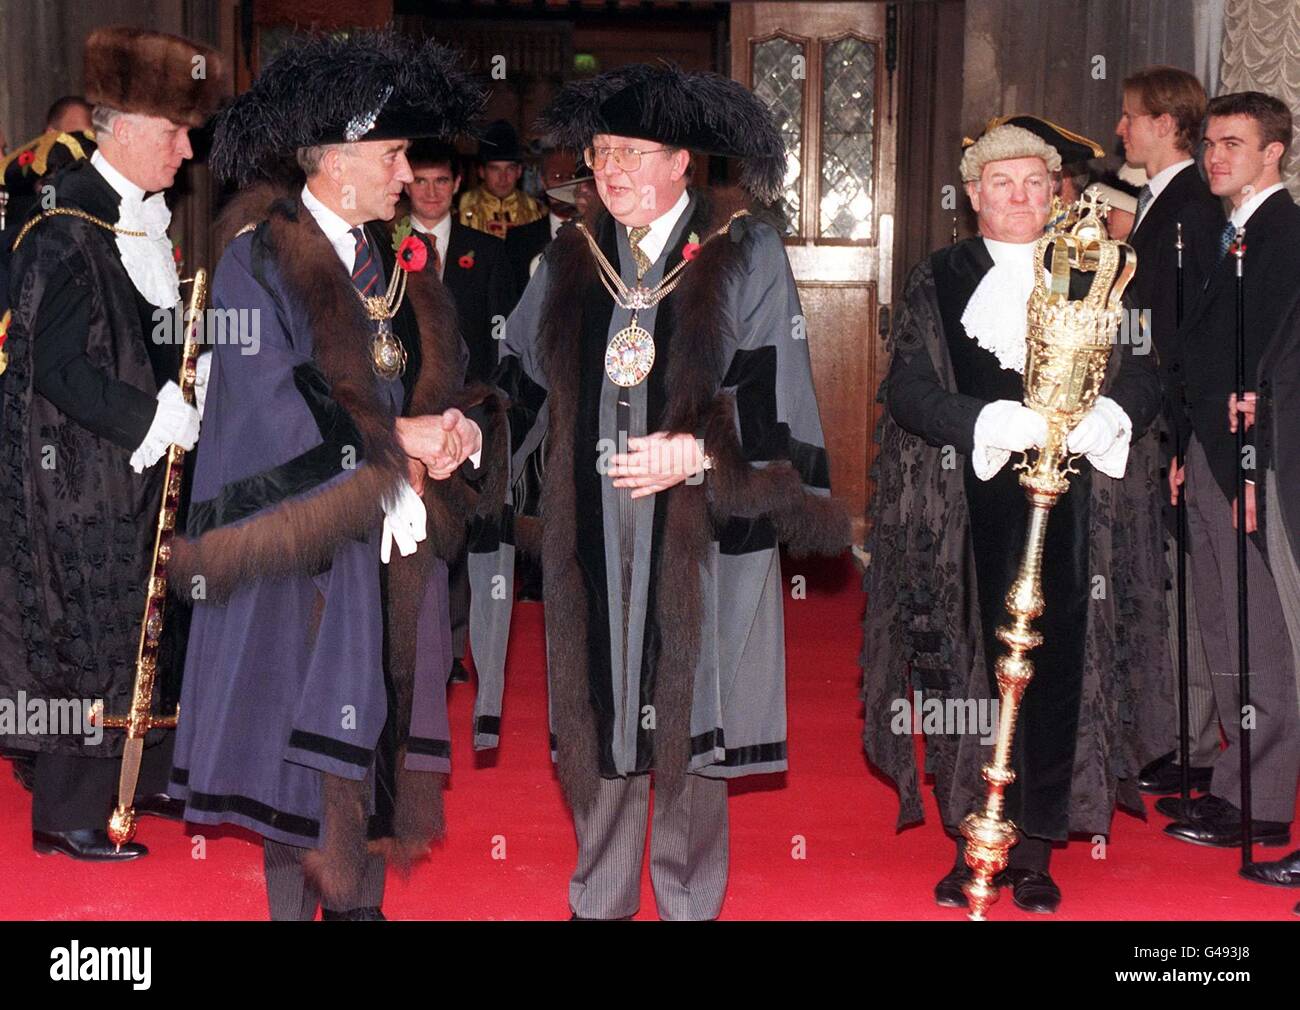 Ex-Lord Mayor of London Sir Roger Cork (2nd left) talks to his successor Alderman Richard Nichols (left) after the post was handed over at a traditional Silent Ceremony in London's Guildhall today (Friday), prior to the Lord Mayor's Show tomorrow. The Lord Mayor has been the elected head of the Corporation of London since 1215. Photograph by Ben Curtis/PA. Stock Photo